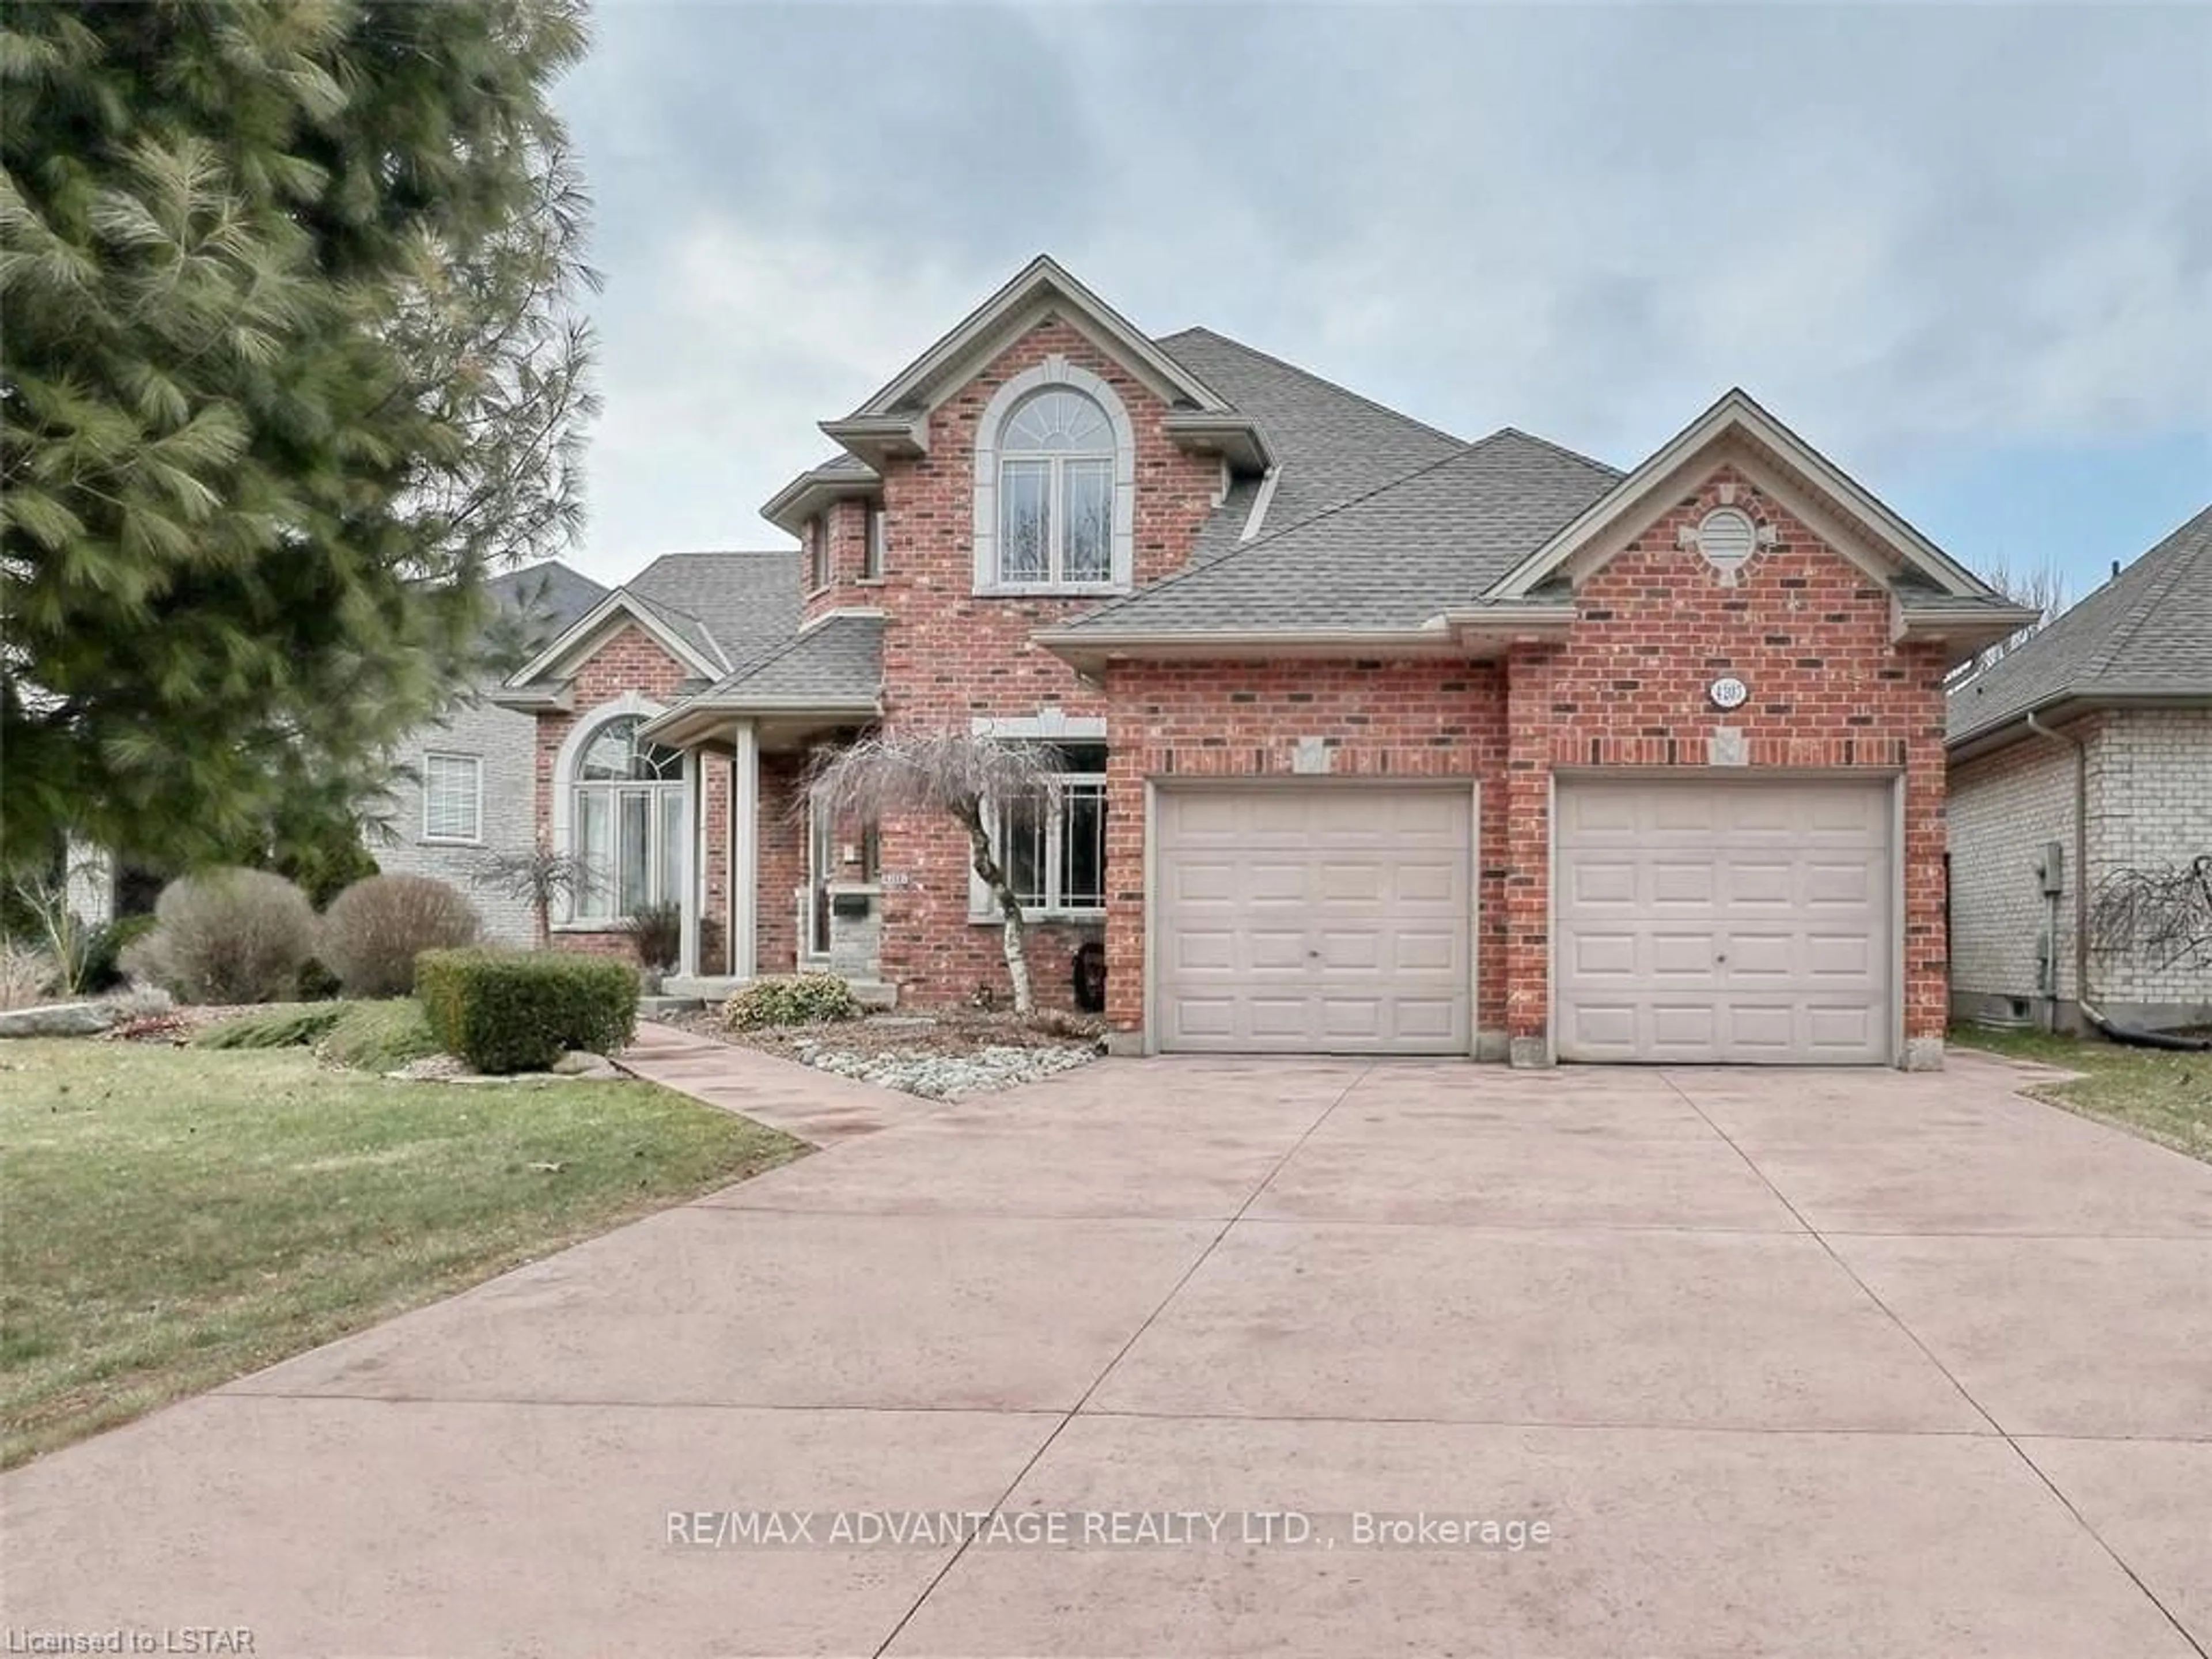 Home with brick exterior material for 4207 Masterson Circ, London Ontario N6P 1T3